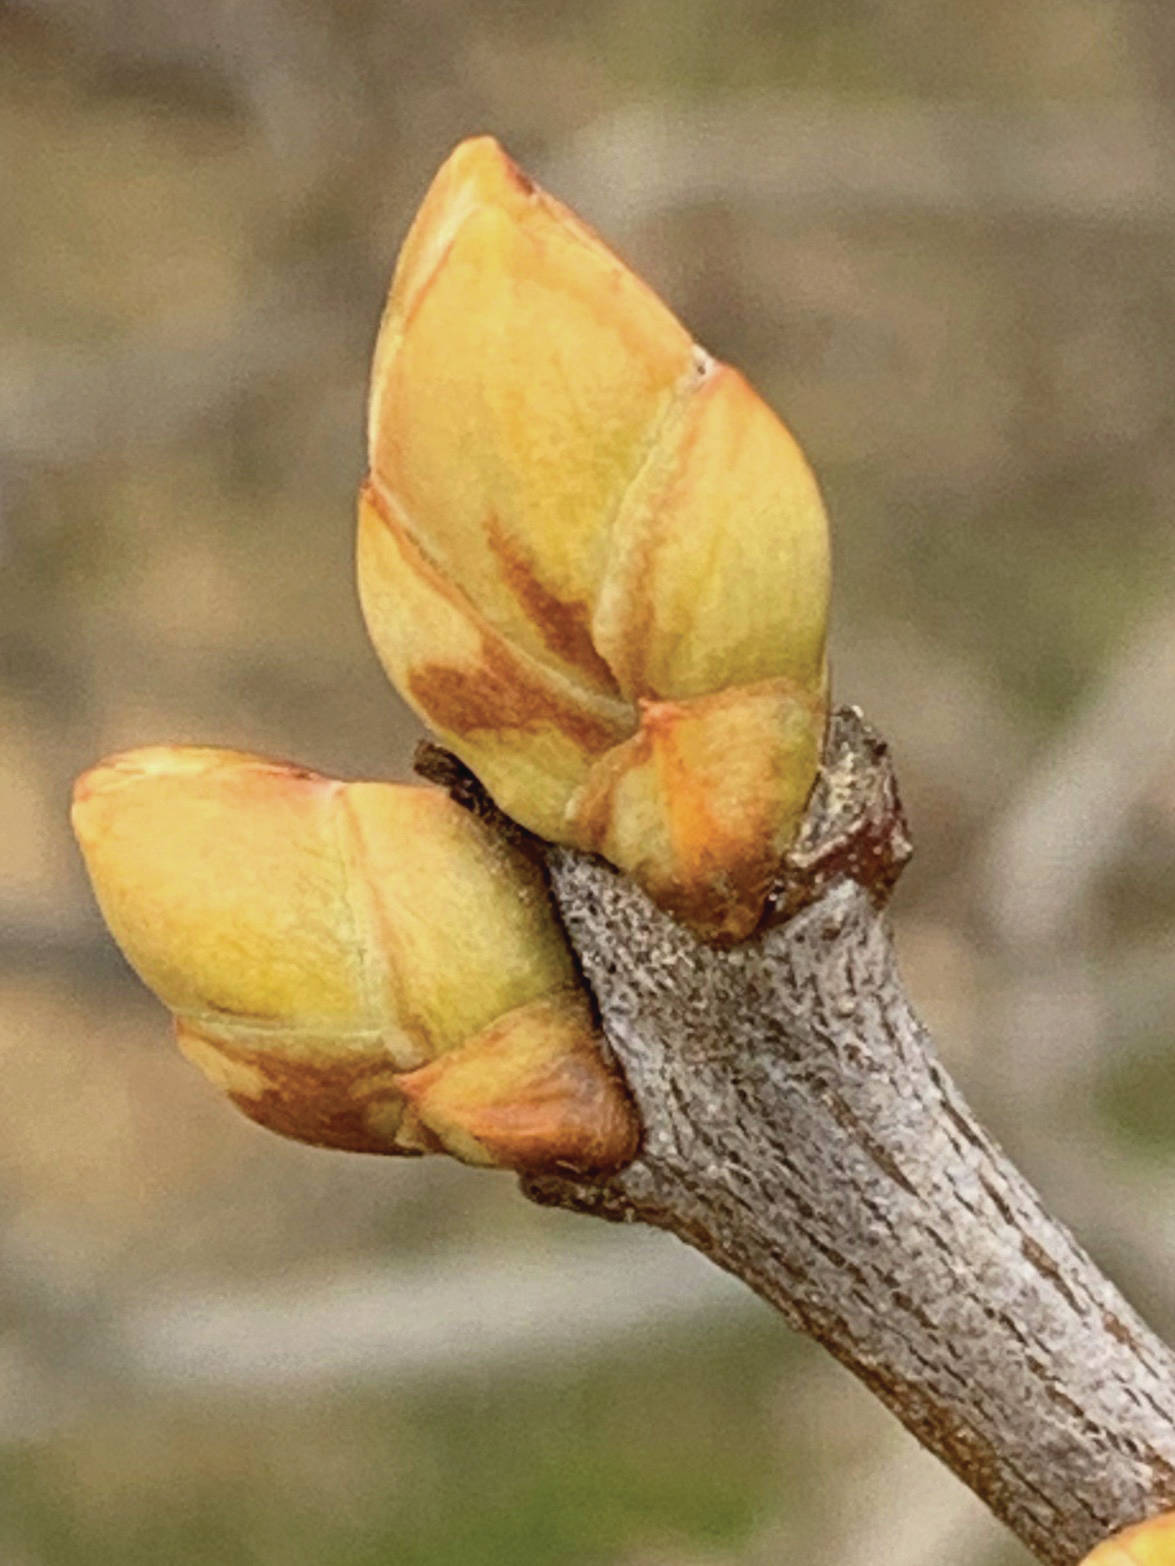 “Promises, promises,” the Kachemak Gardener writes of shoots and buds blooming on April 12, 2020, in her Homer, Alaska, garden. (Photo by Rosemary Fitzpatrick)